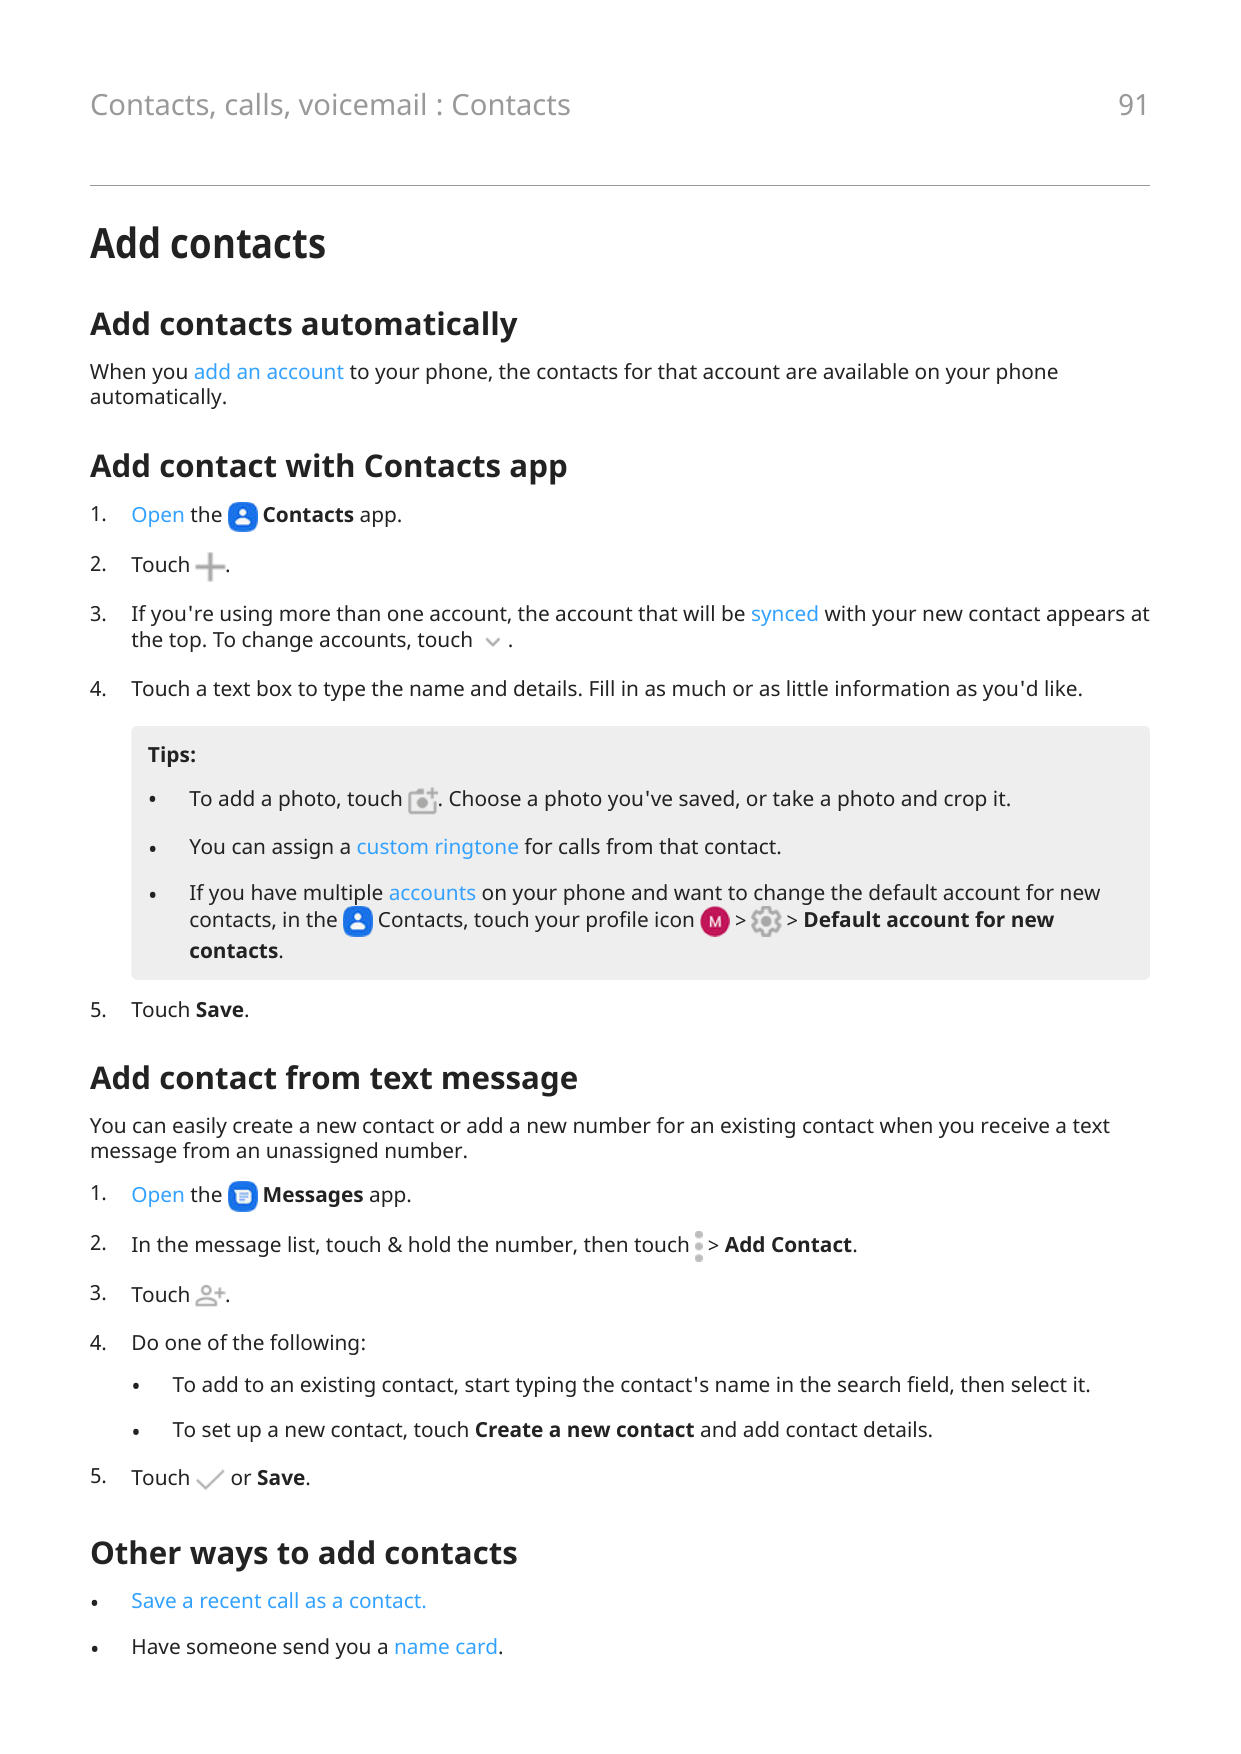 Contacts, calls, voicemail : Contacts91Add contactsAdd contacts automaticallyWhen you add an account to your phone, the contacts